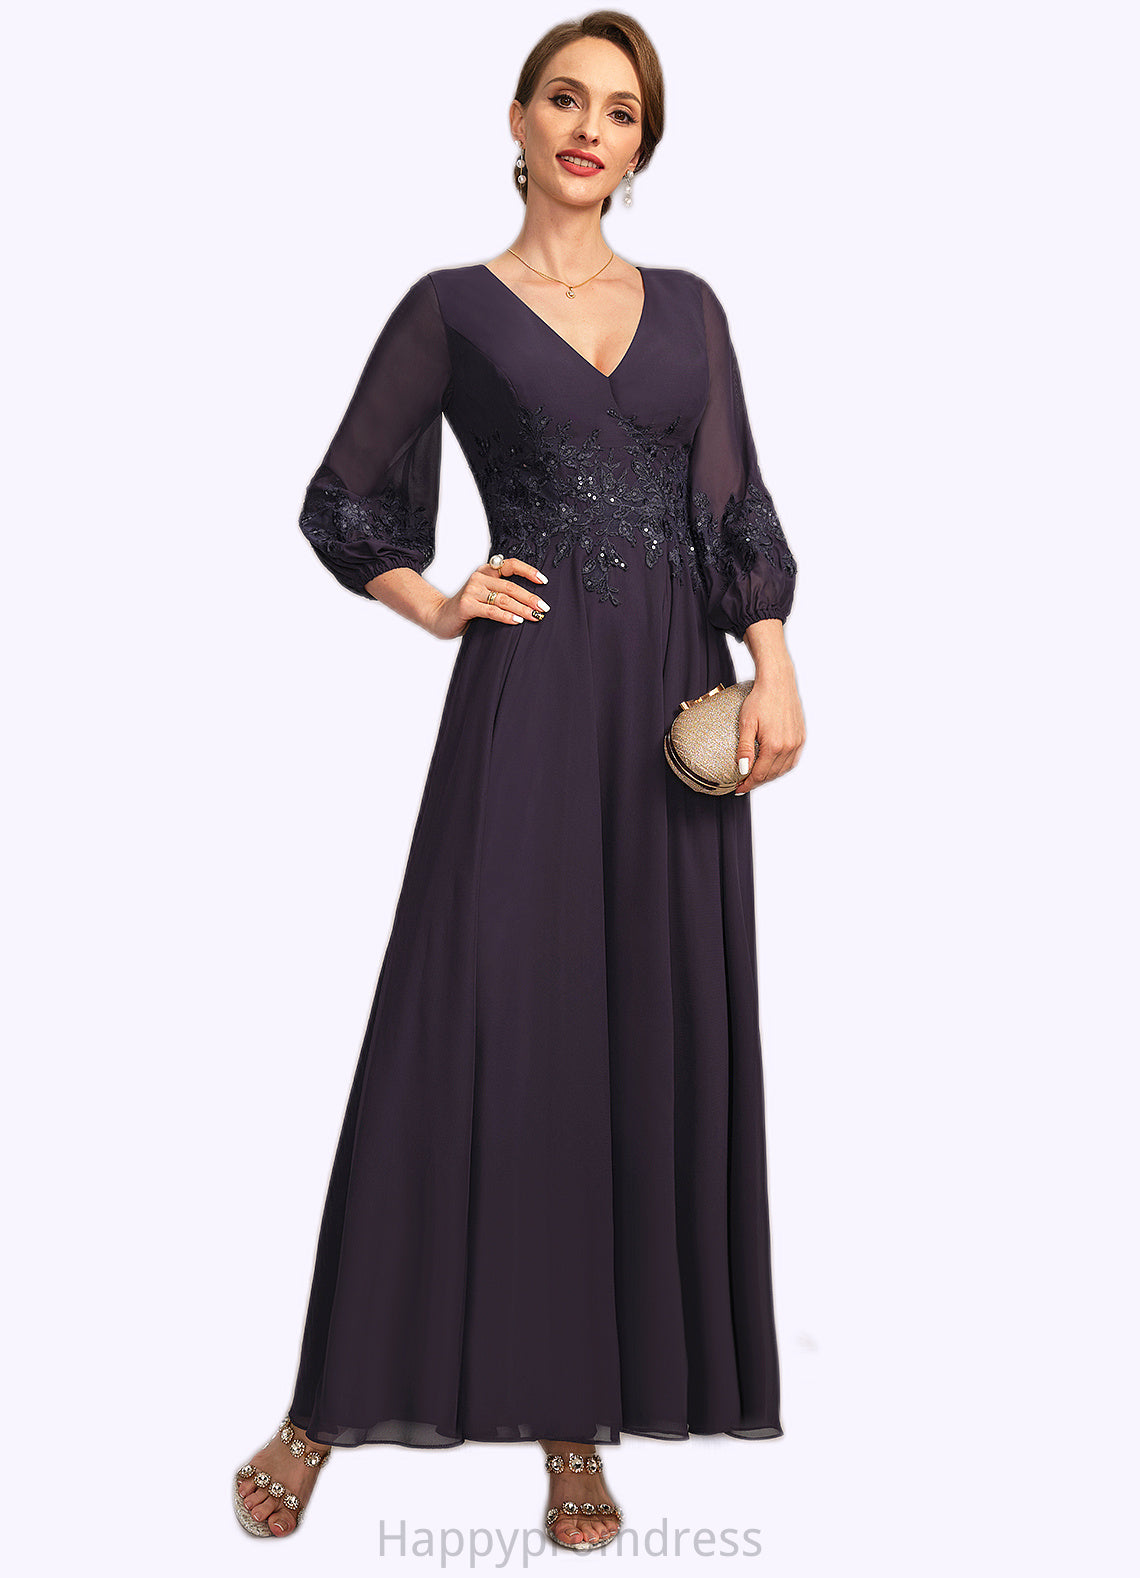 Bria A-line V-Neck Ankle-Length Chiffon Lace Mother of the Bride Dress With Sequins XXSP0021655